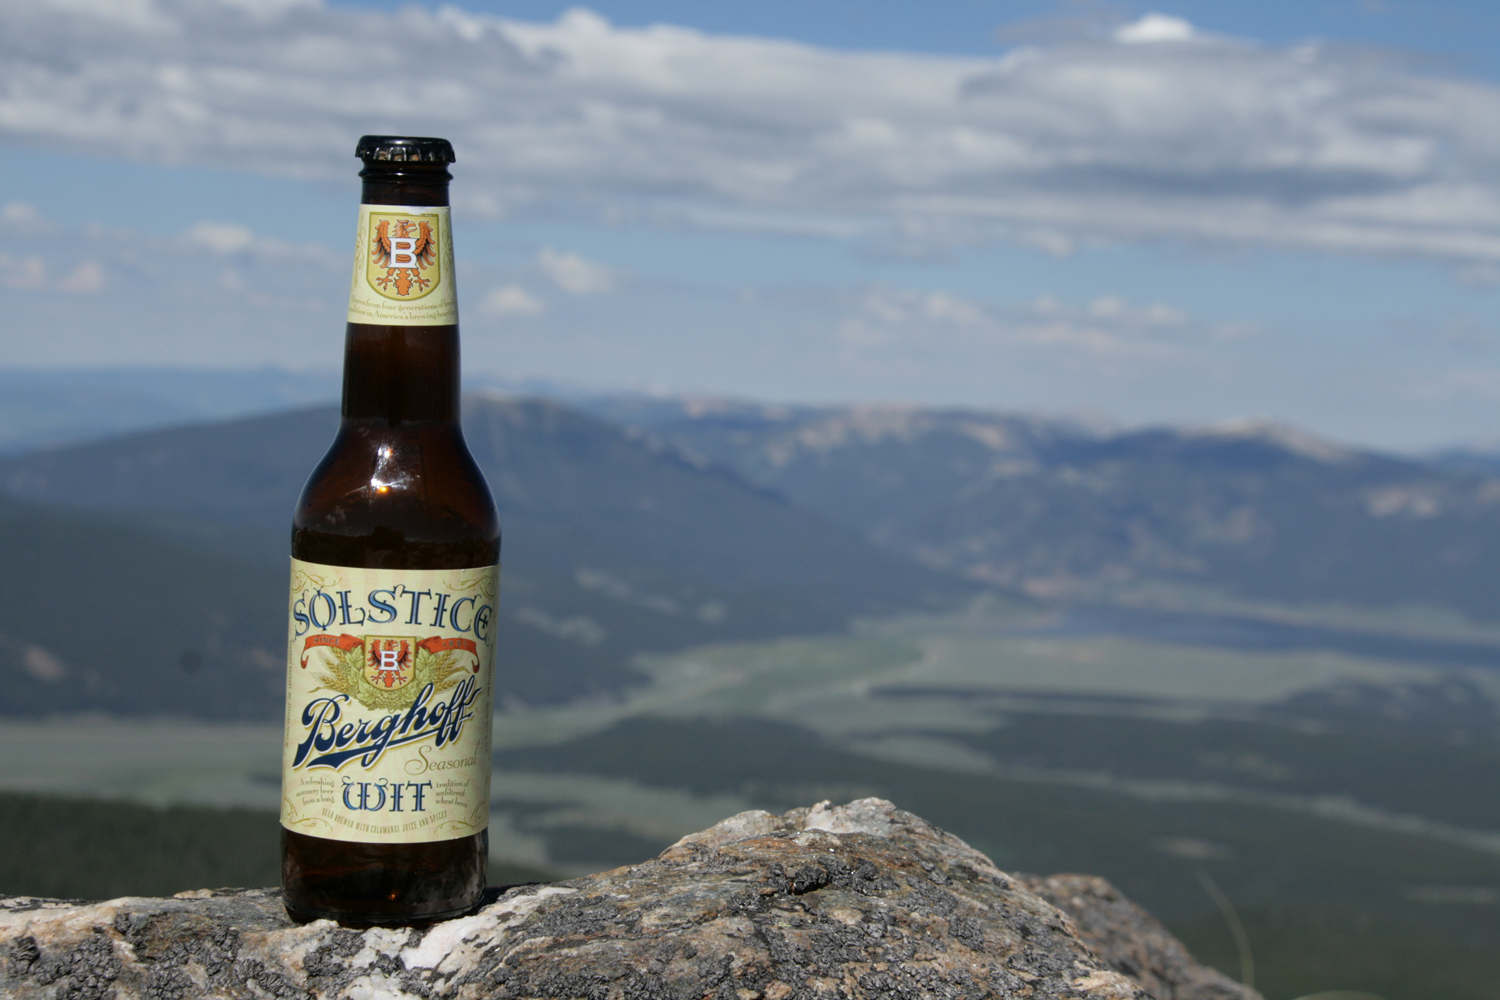 Be on top of the world with Berghoff's Solstice Wit summer beer.